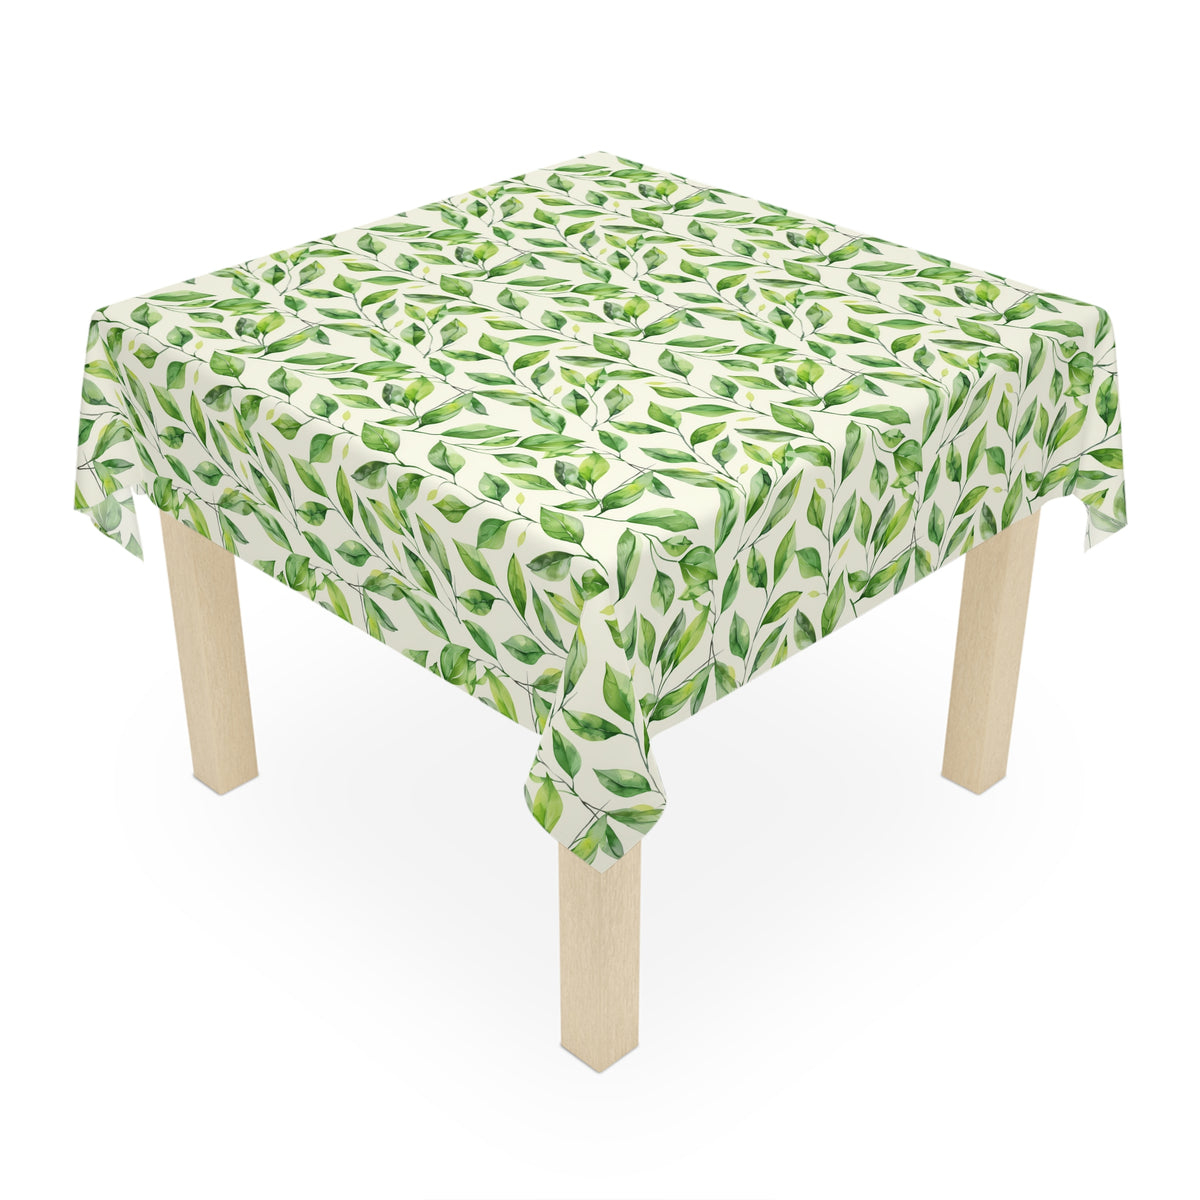 Decorative Tablecloth with Green Gardens Design, Durable Polyester (55.1&quot; x 55.1&quot;)